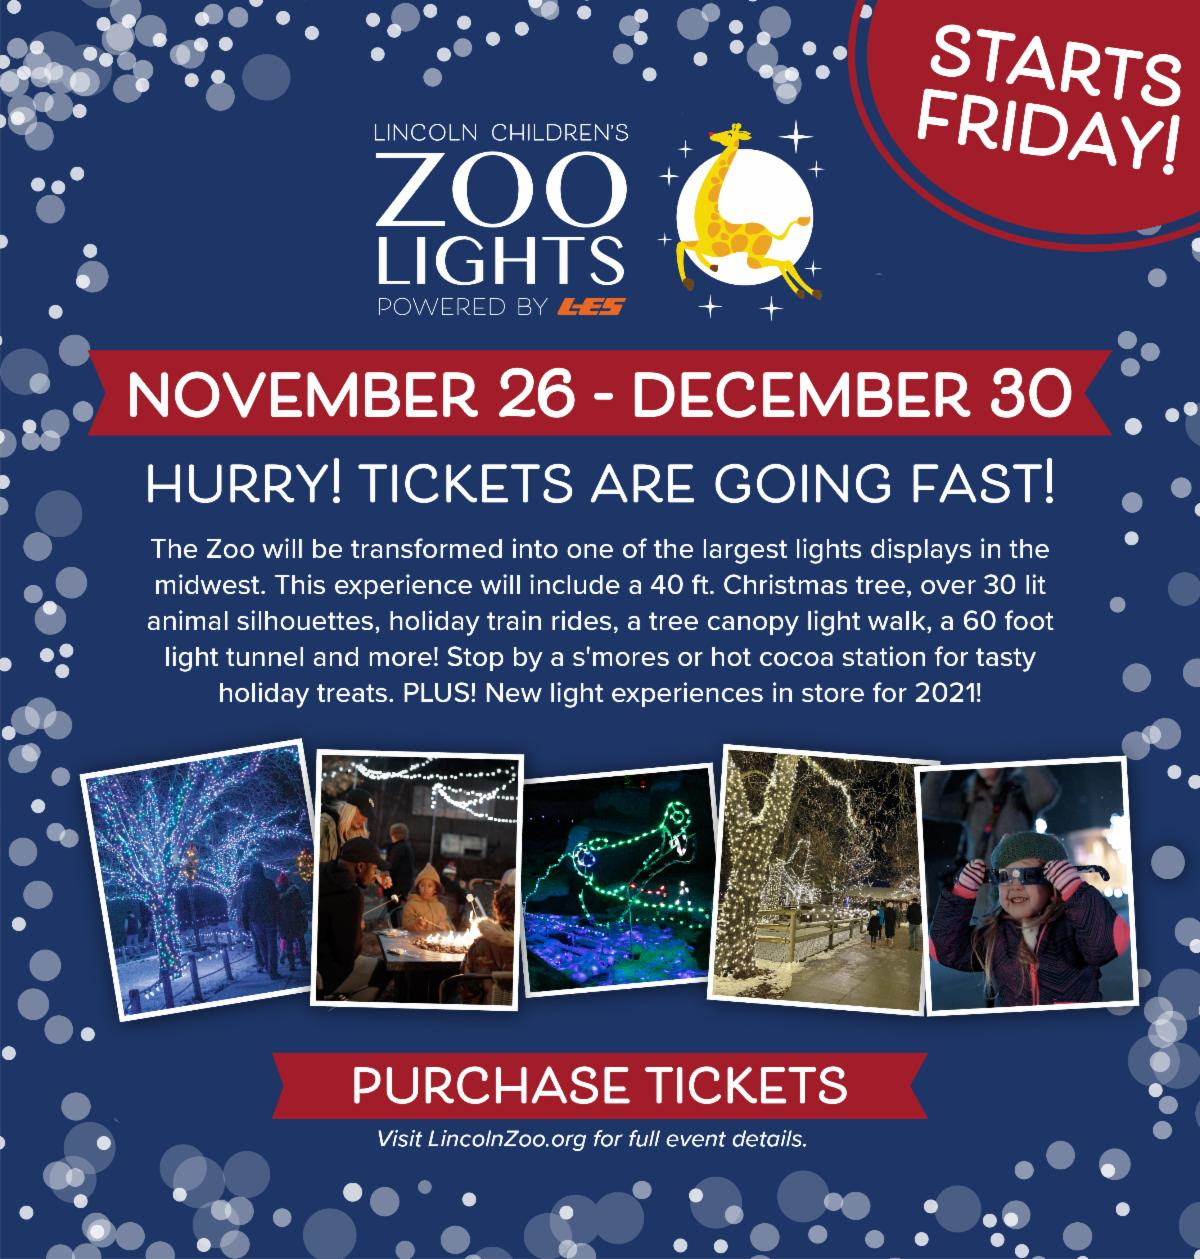 Zoo Lights starts Friday! Tickets are going fast! Get your tickets today! 